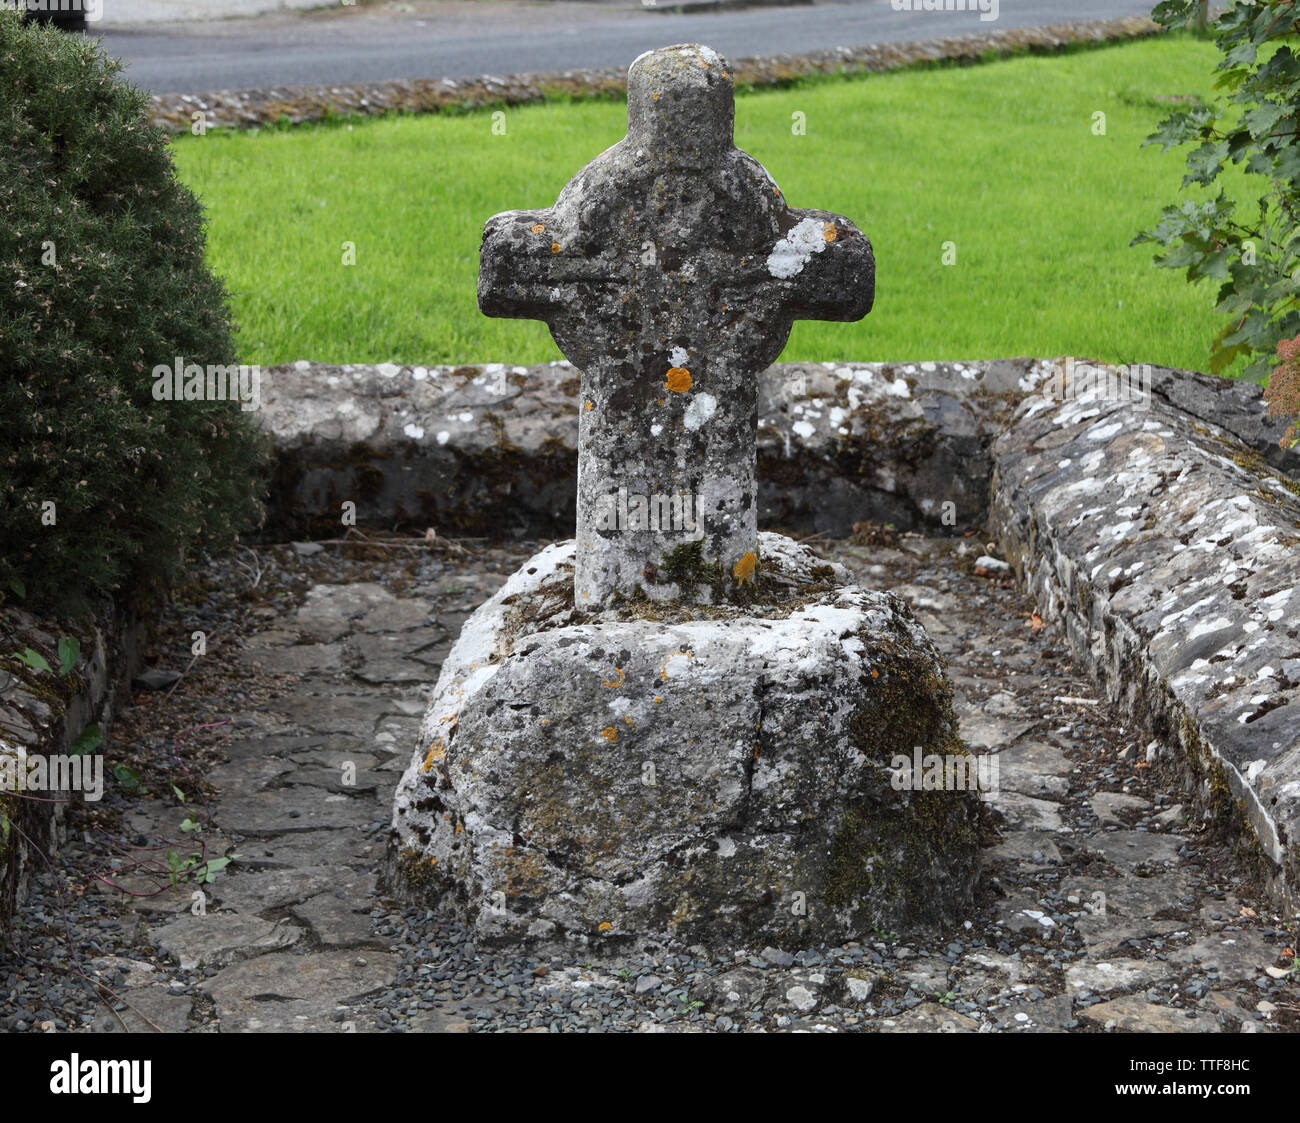 Ireland Westmeath - Message Boards Search - Ancestry